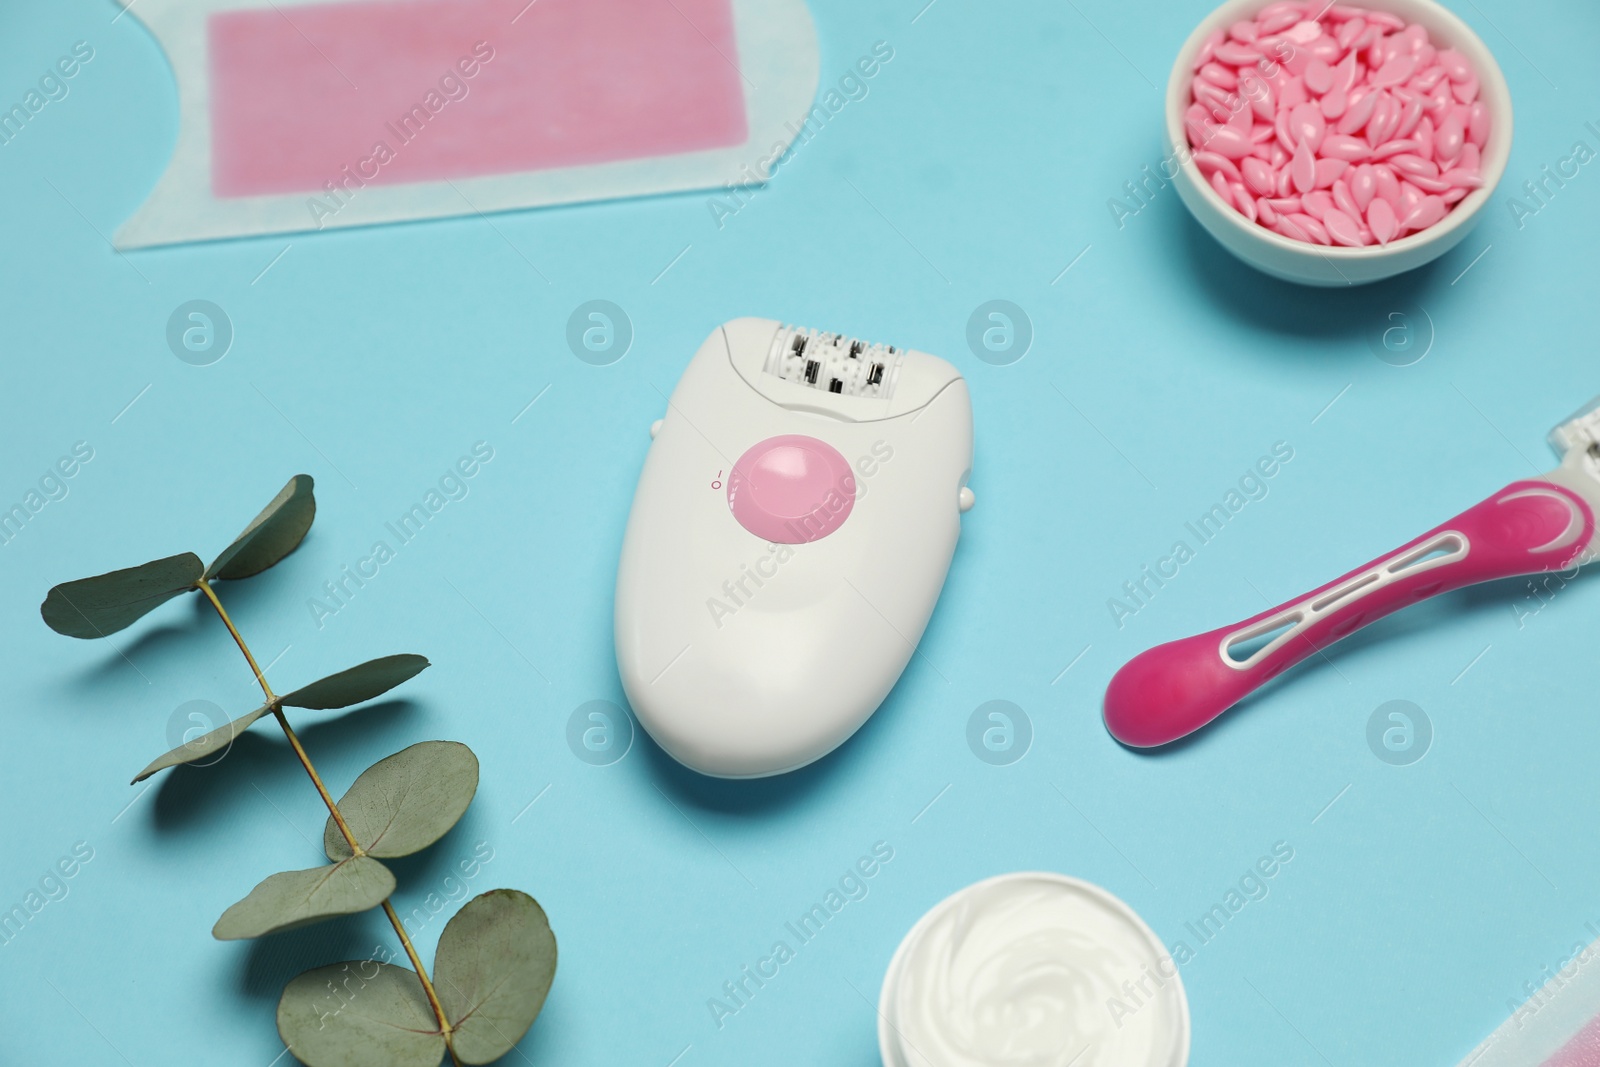 Photo of Epilator and other hair removal products on light blue background